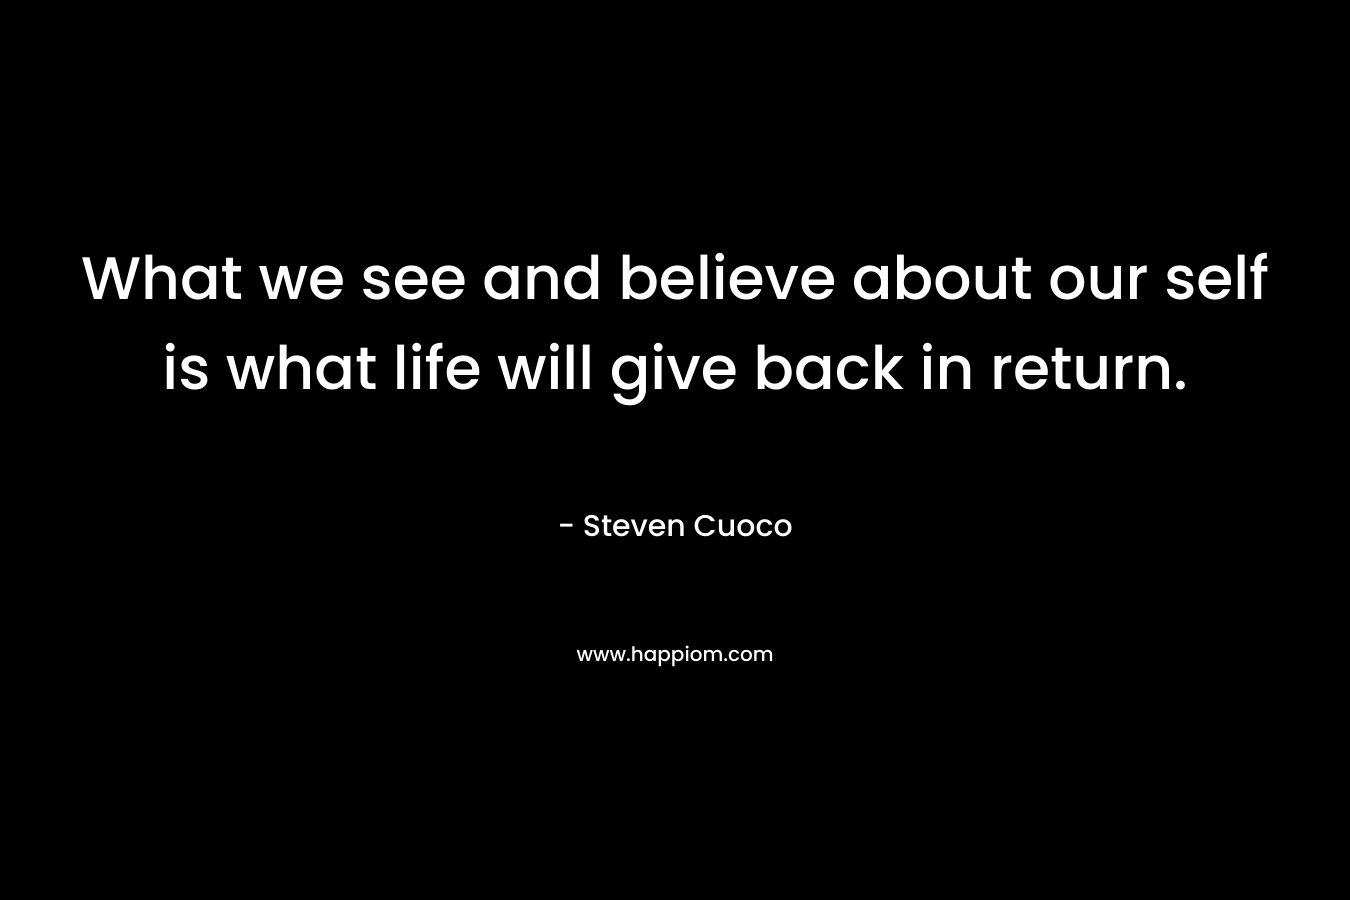 What we see and believe about our self is what life will give back in return.